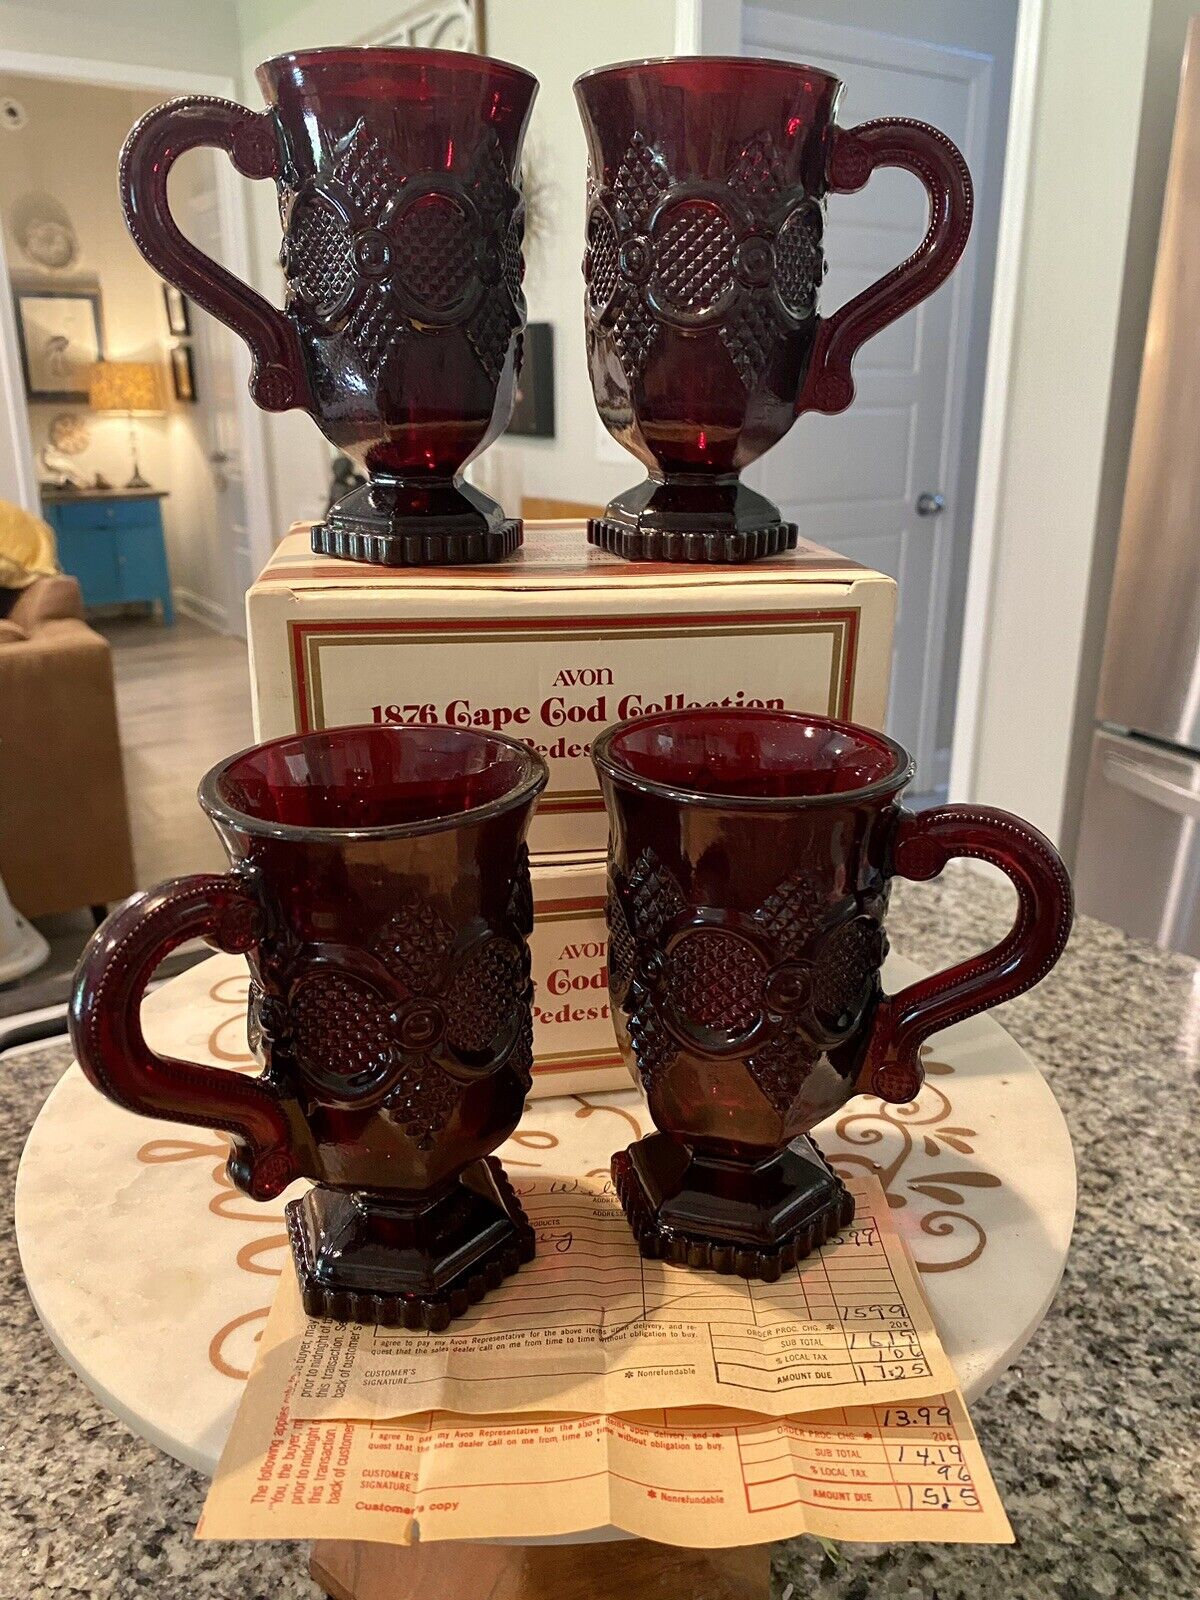 Avon 1876 Cape Cod Collection 4 Red Glass Pedestal Mugs In Box W/old Receipt